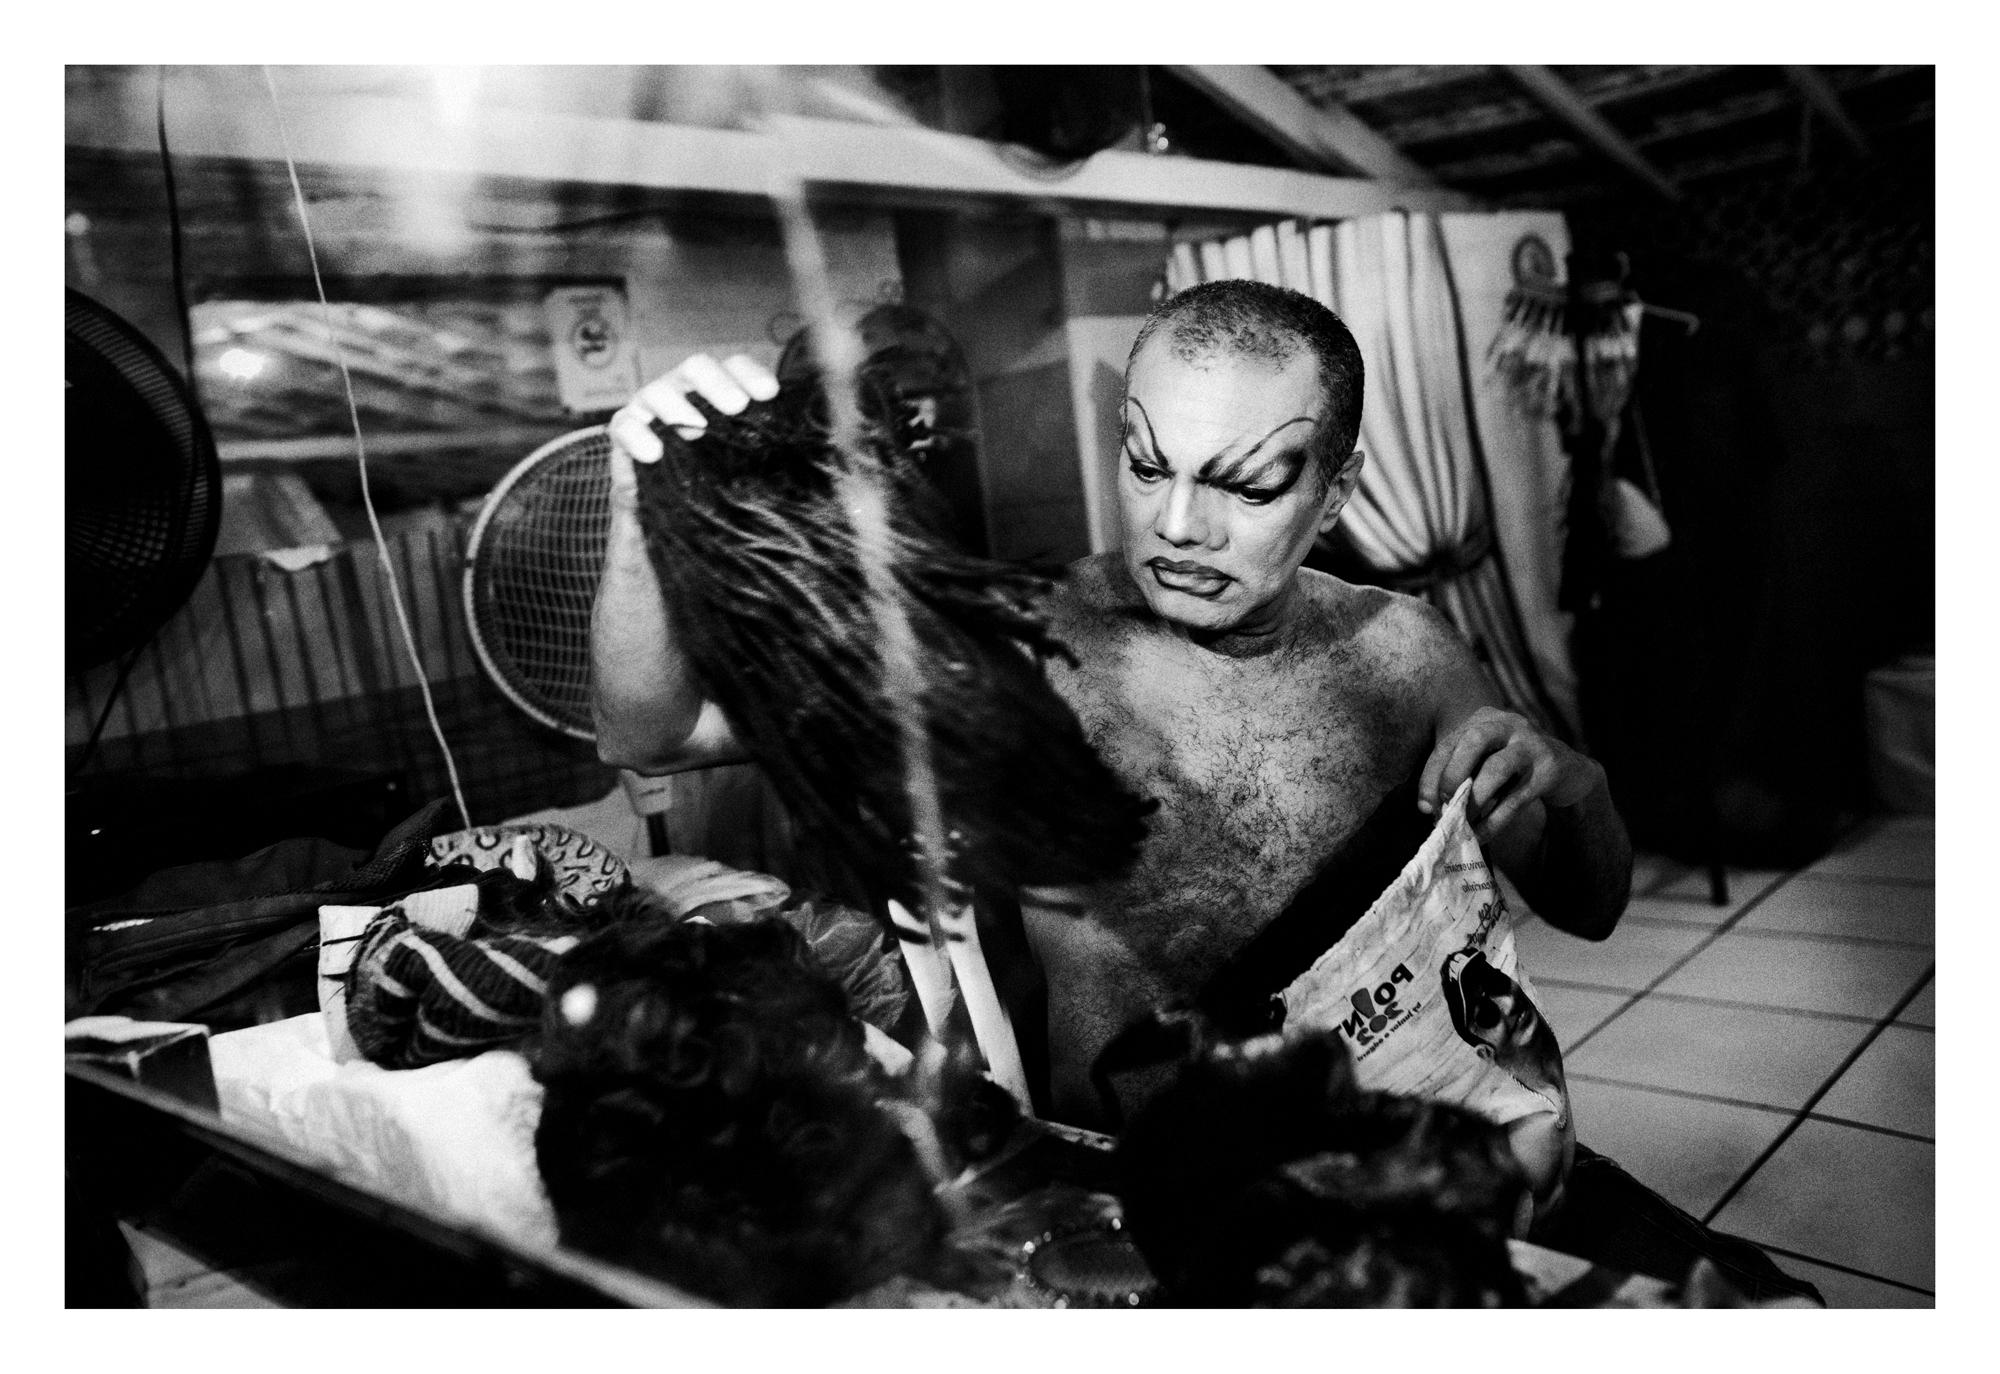 Rio de Janeiro, Brazil. April 2012. "Turma Ok" Club, located in Lapa. Lorna Washington getting ready for a performance. Lorna, precursor of drag queens in Rio de Janeiro, always satirized the Brazilian divas such as Maria Bethania and Elza Soares. Lorna, who is one of the founders of the band Carmen Miranda, witnessed the inauguration of the first spaces used exclusively for the Rio GLS like ï¿½Turma okï¿½ One of his most applauded show was at the club Parrots in the mid-80s, with the direction of Joseph Walter Girï¿½o de Melo. But his success was not limited to Brazil. In 1996, Lorna Washington performed also in the USA. Long before there was any organized gay movement in Brazil, "Turma Ok" was founded in the early 60's in Rio. With almost 50 years of existence, is the oldest gay group in Brazil, and remains active producing cultural events and promoting camaraderie among the participants.